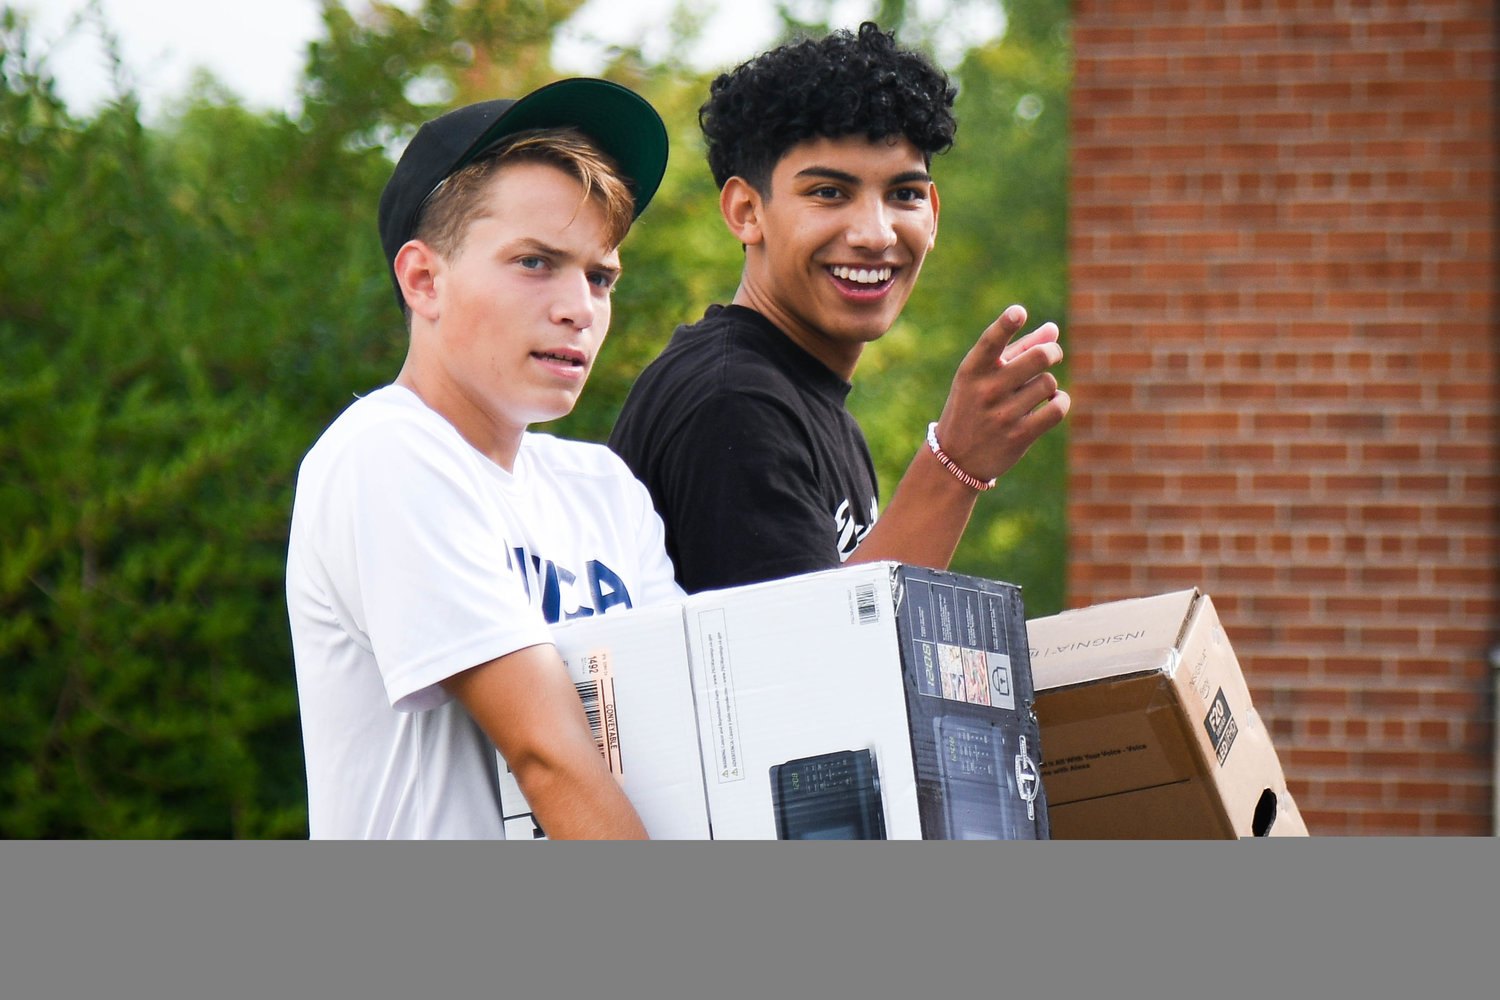 Bruce Oremus and Brennyn Ordonez help Utica University’s Class of 2026 move into their dorms on Tuesday.